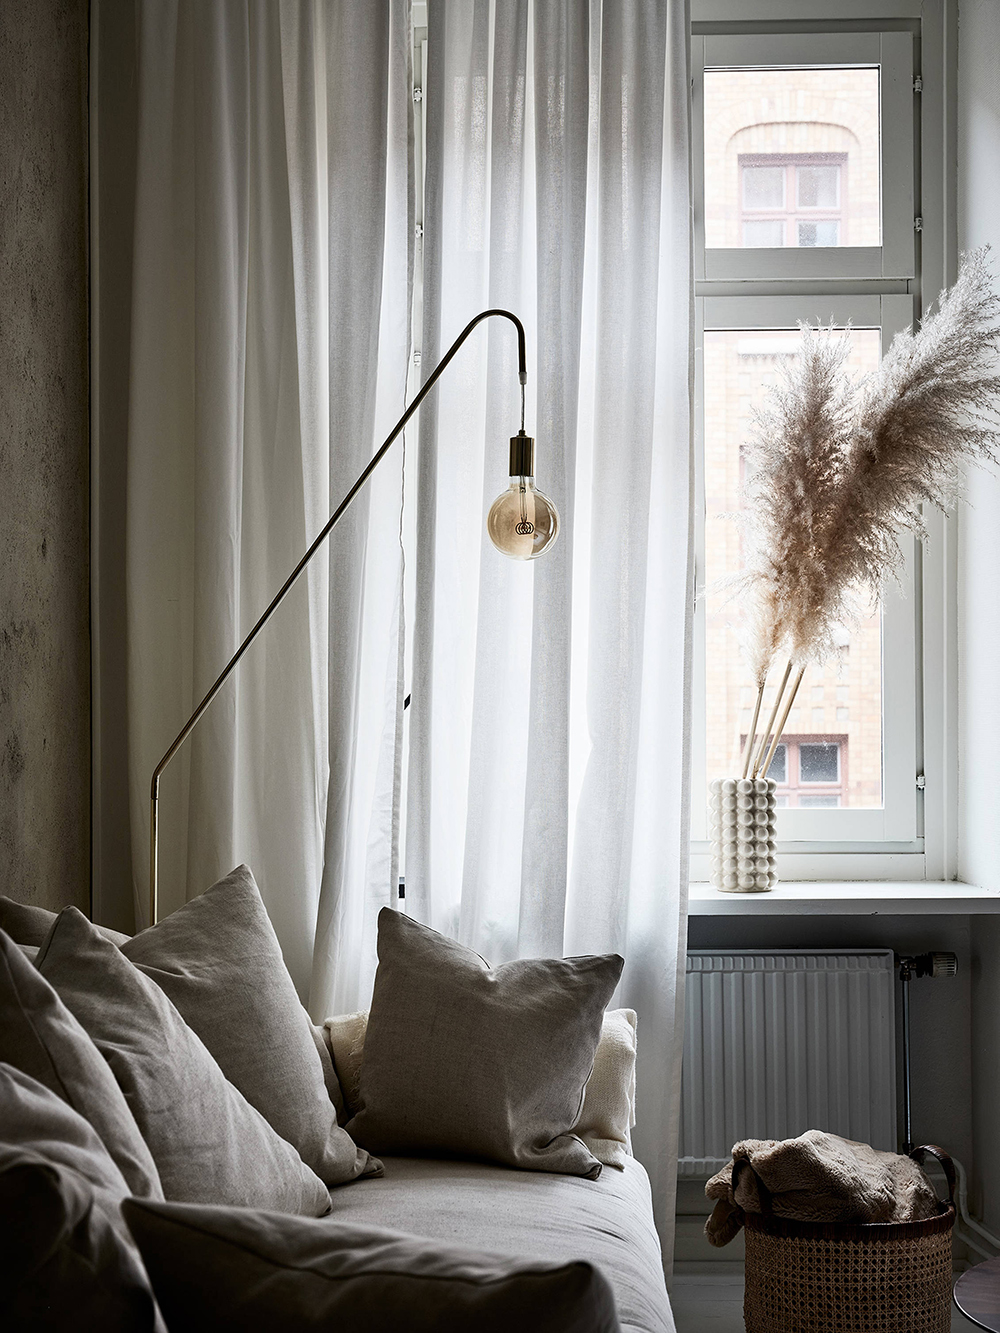 Moody Swedish apartment with Pampas grass as decor